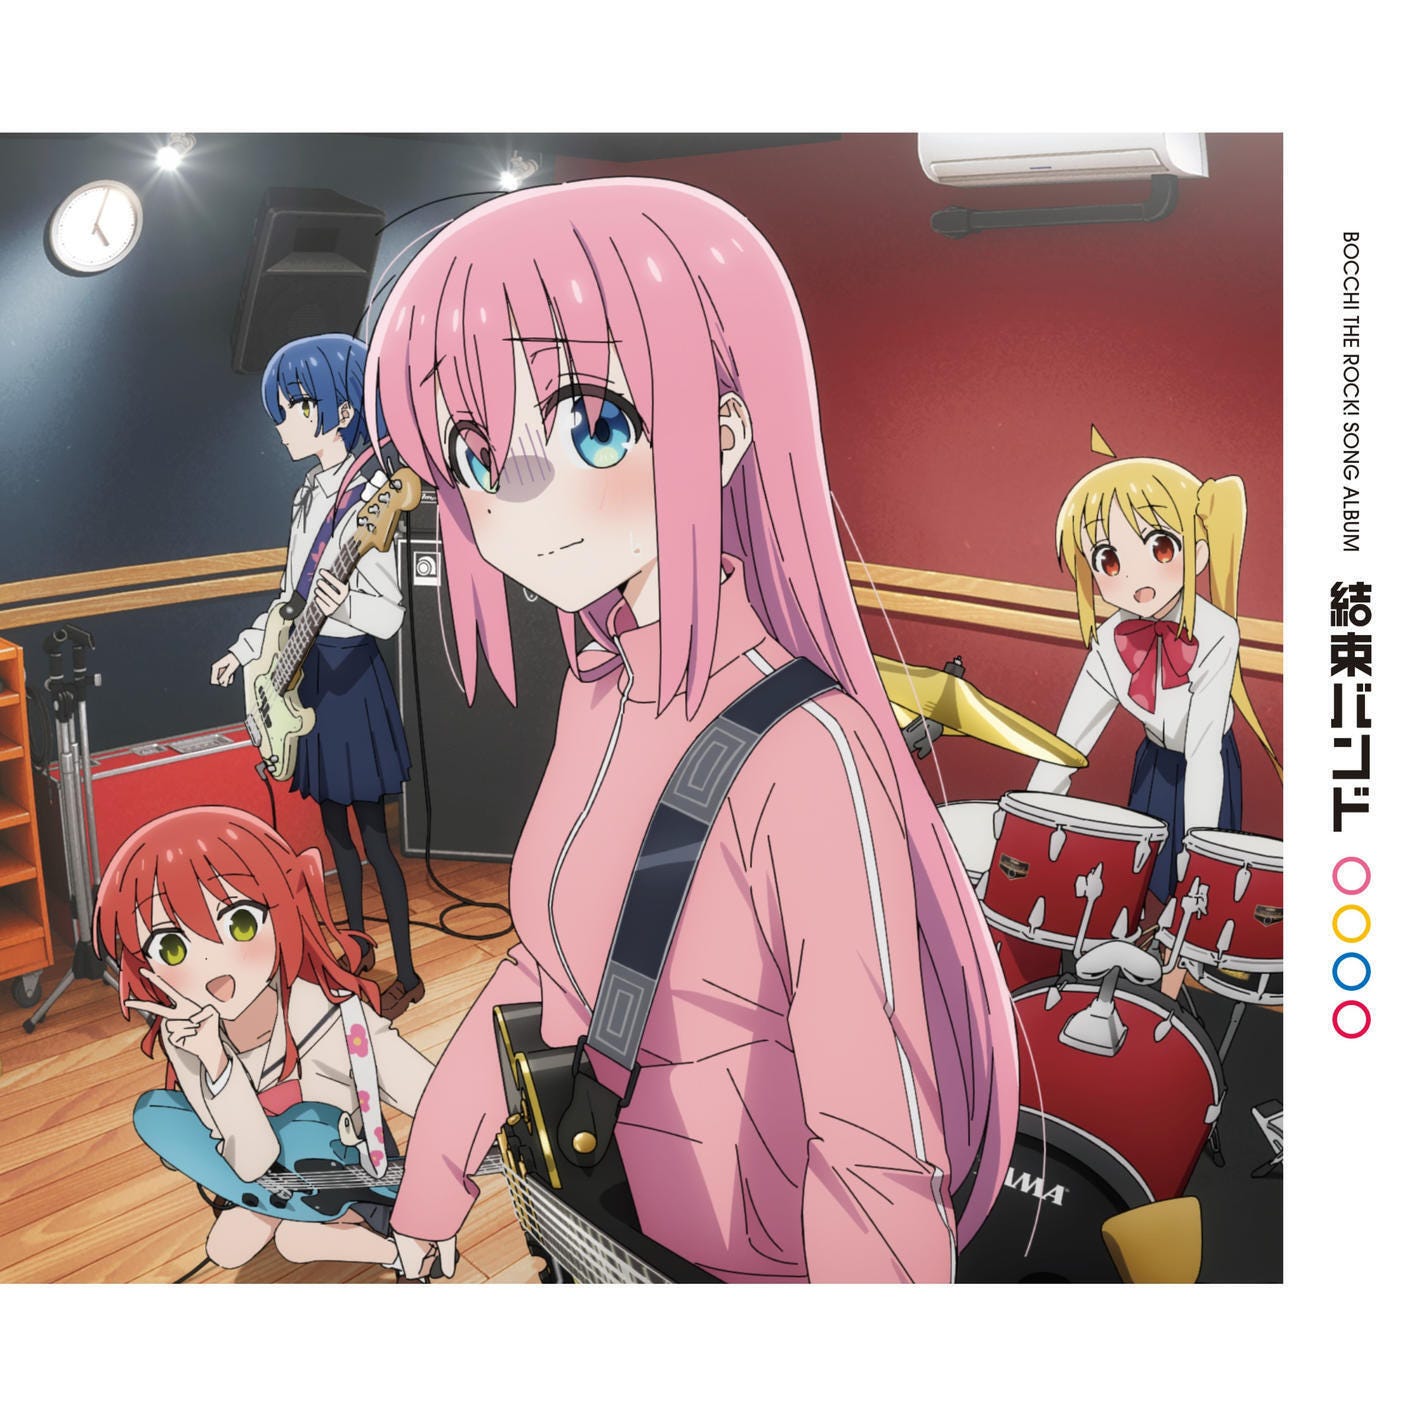 Bocchi the Rock! / Awesome Music - TV Tropes